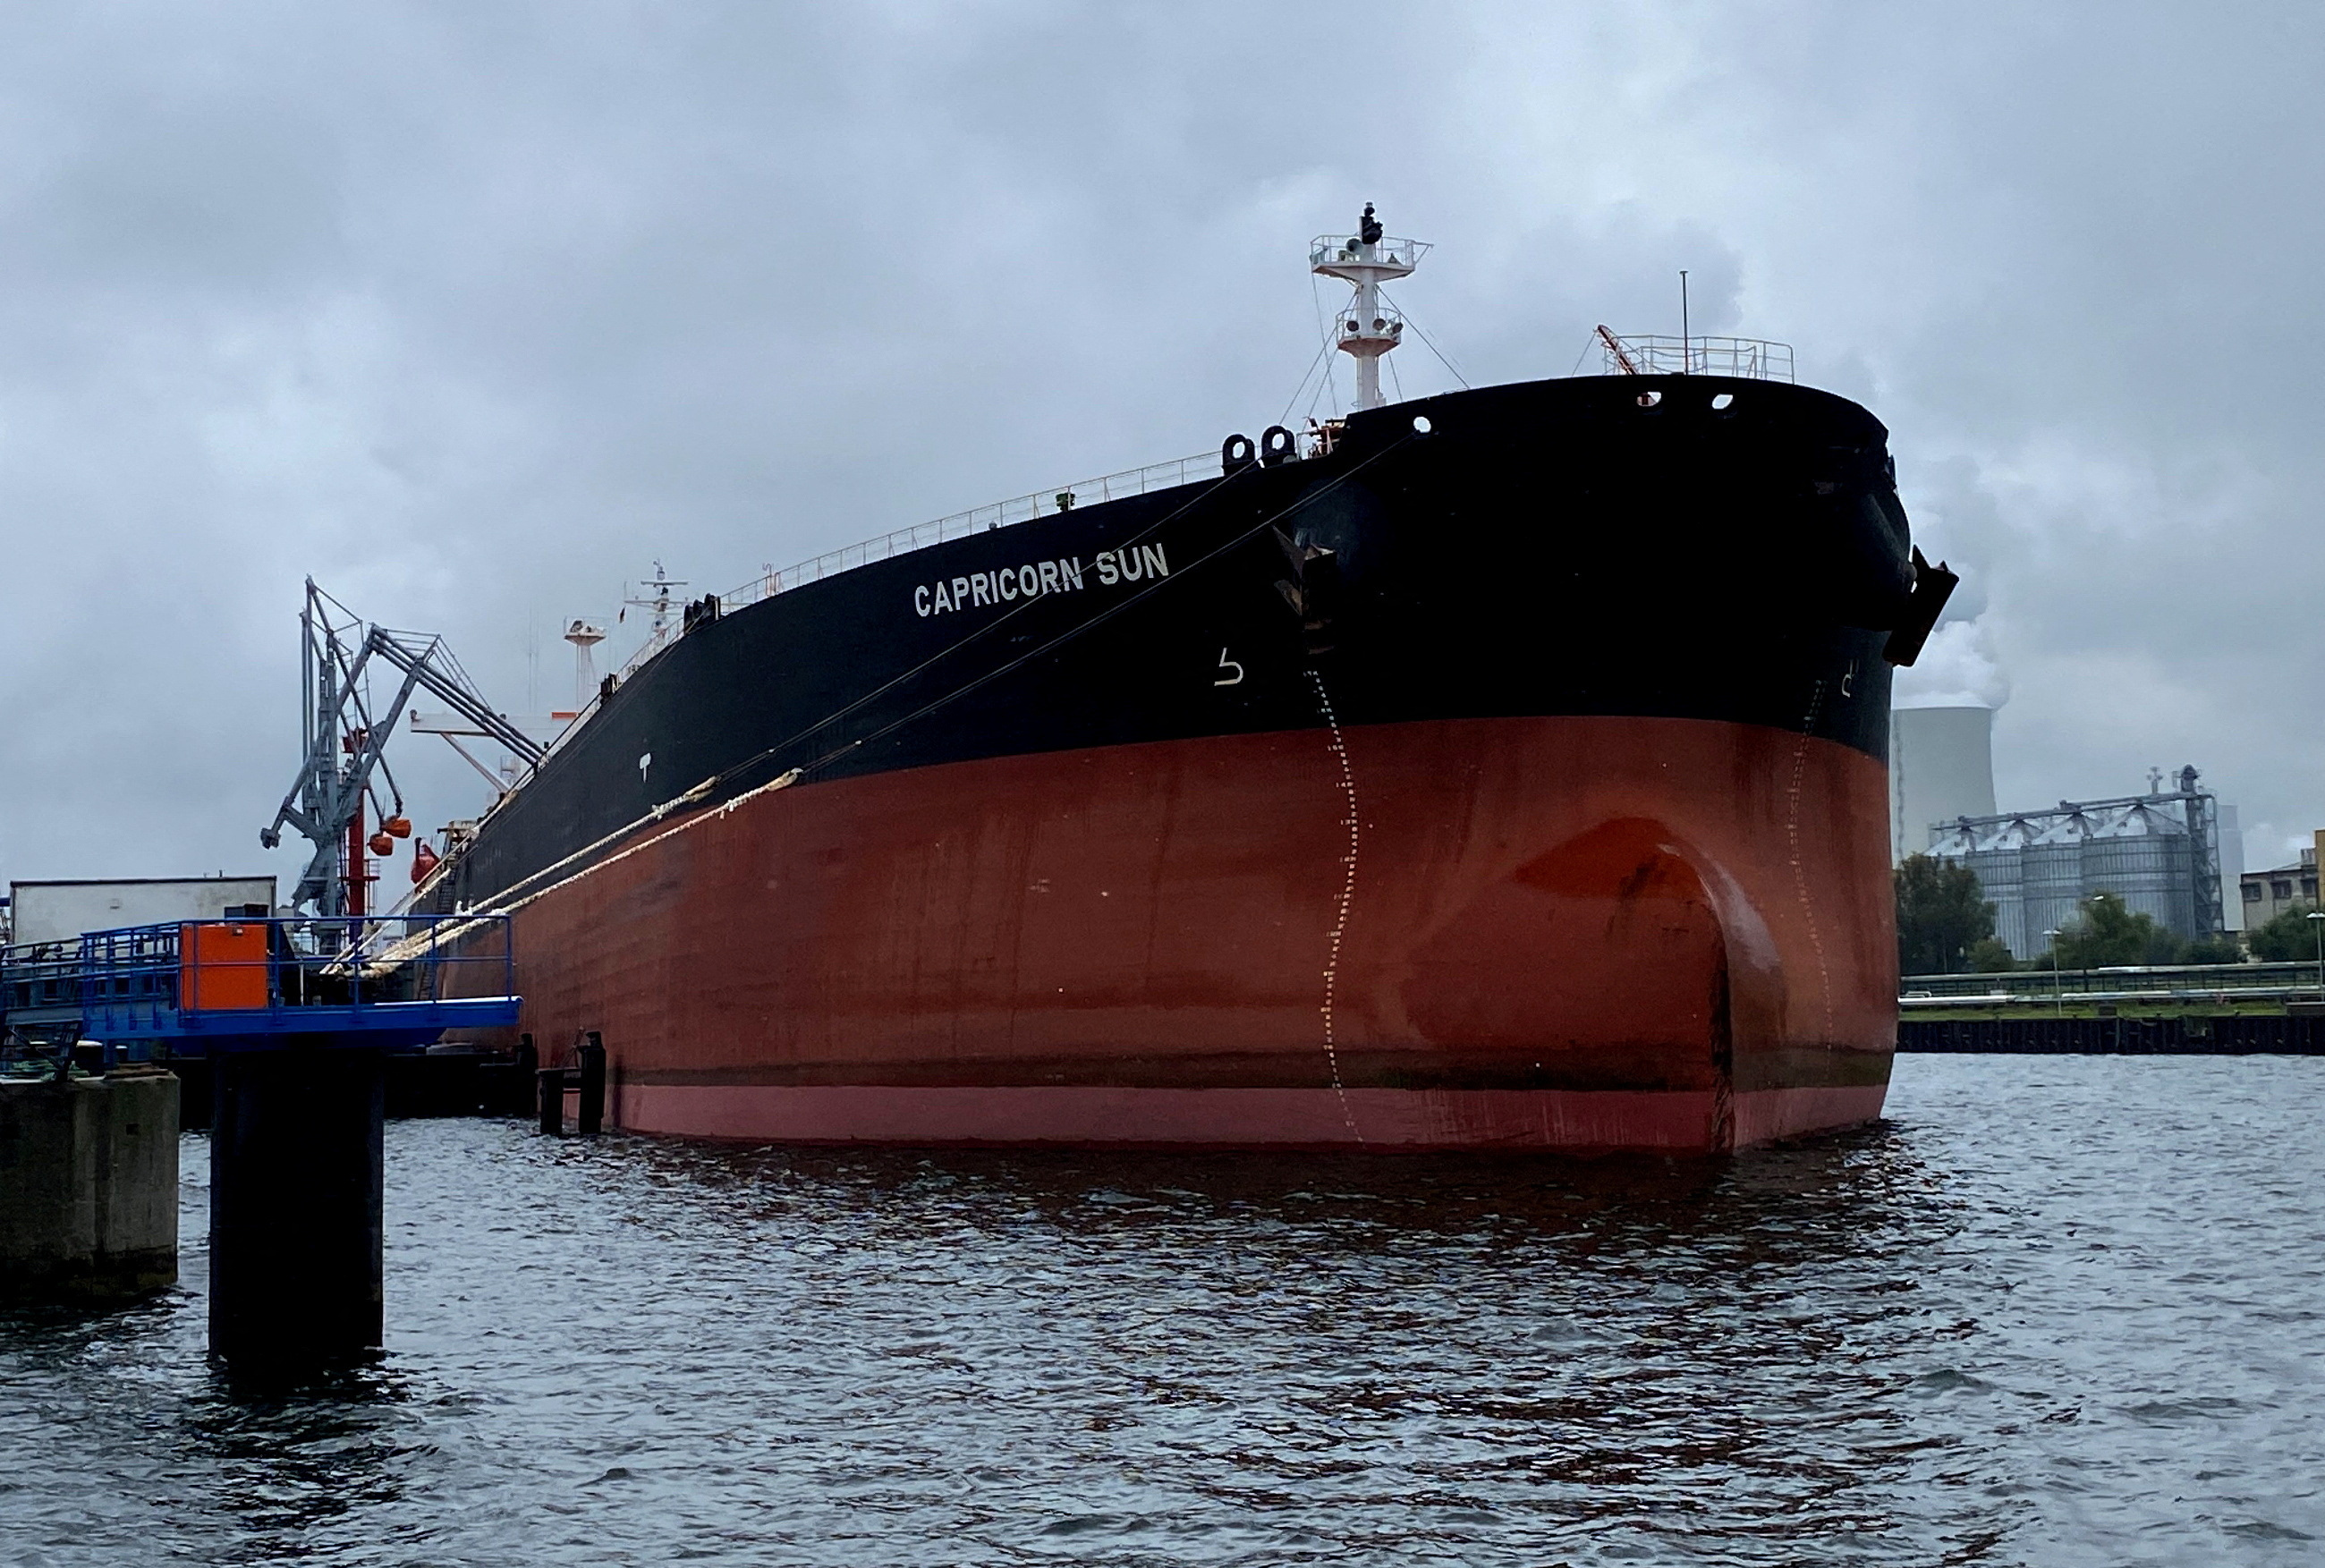 U.S. sour crude cargo sails to Germany as Russia sanctions bite